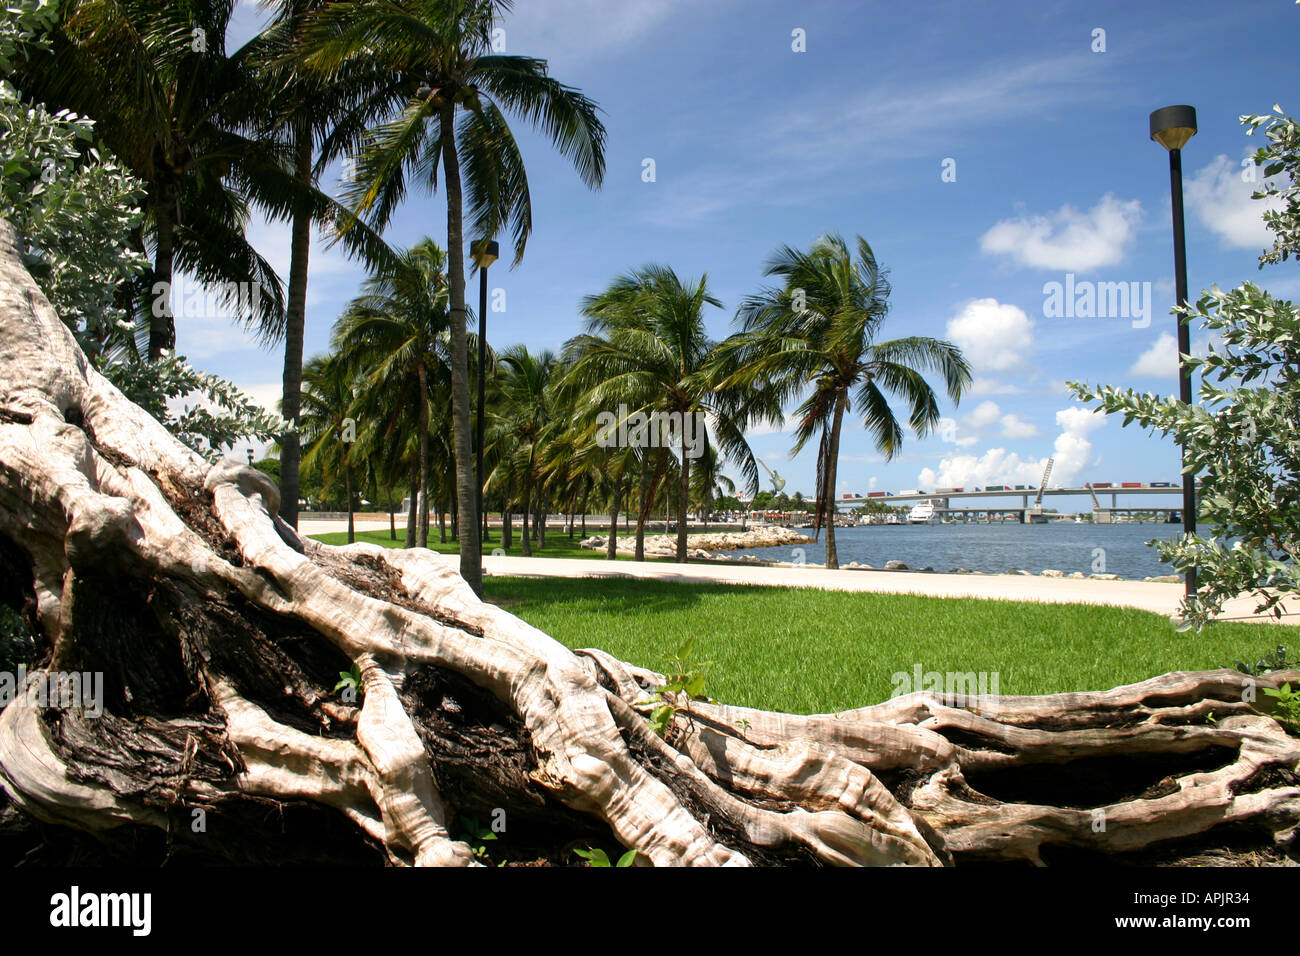 Overlooking the Port of Miami Downtown Bayside area Florida United States of America Stock Photo